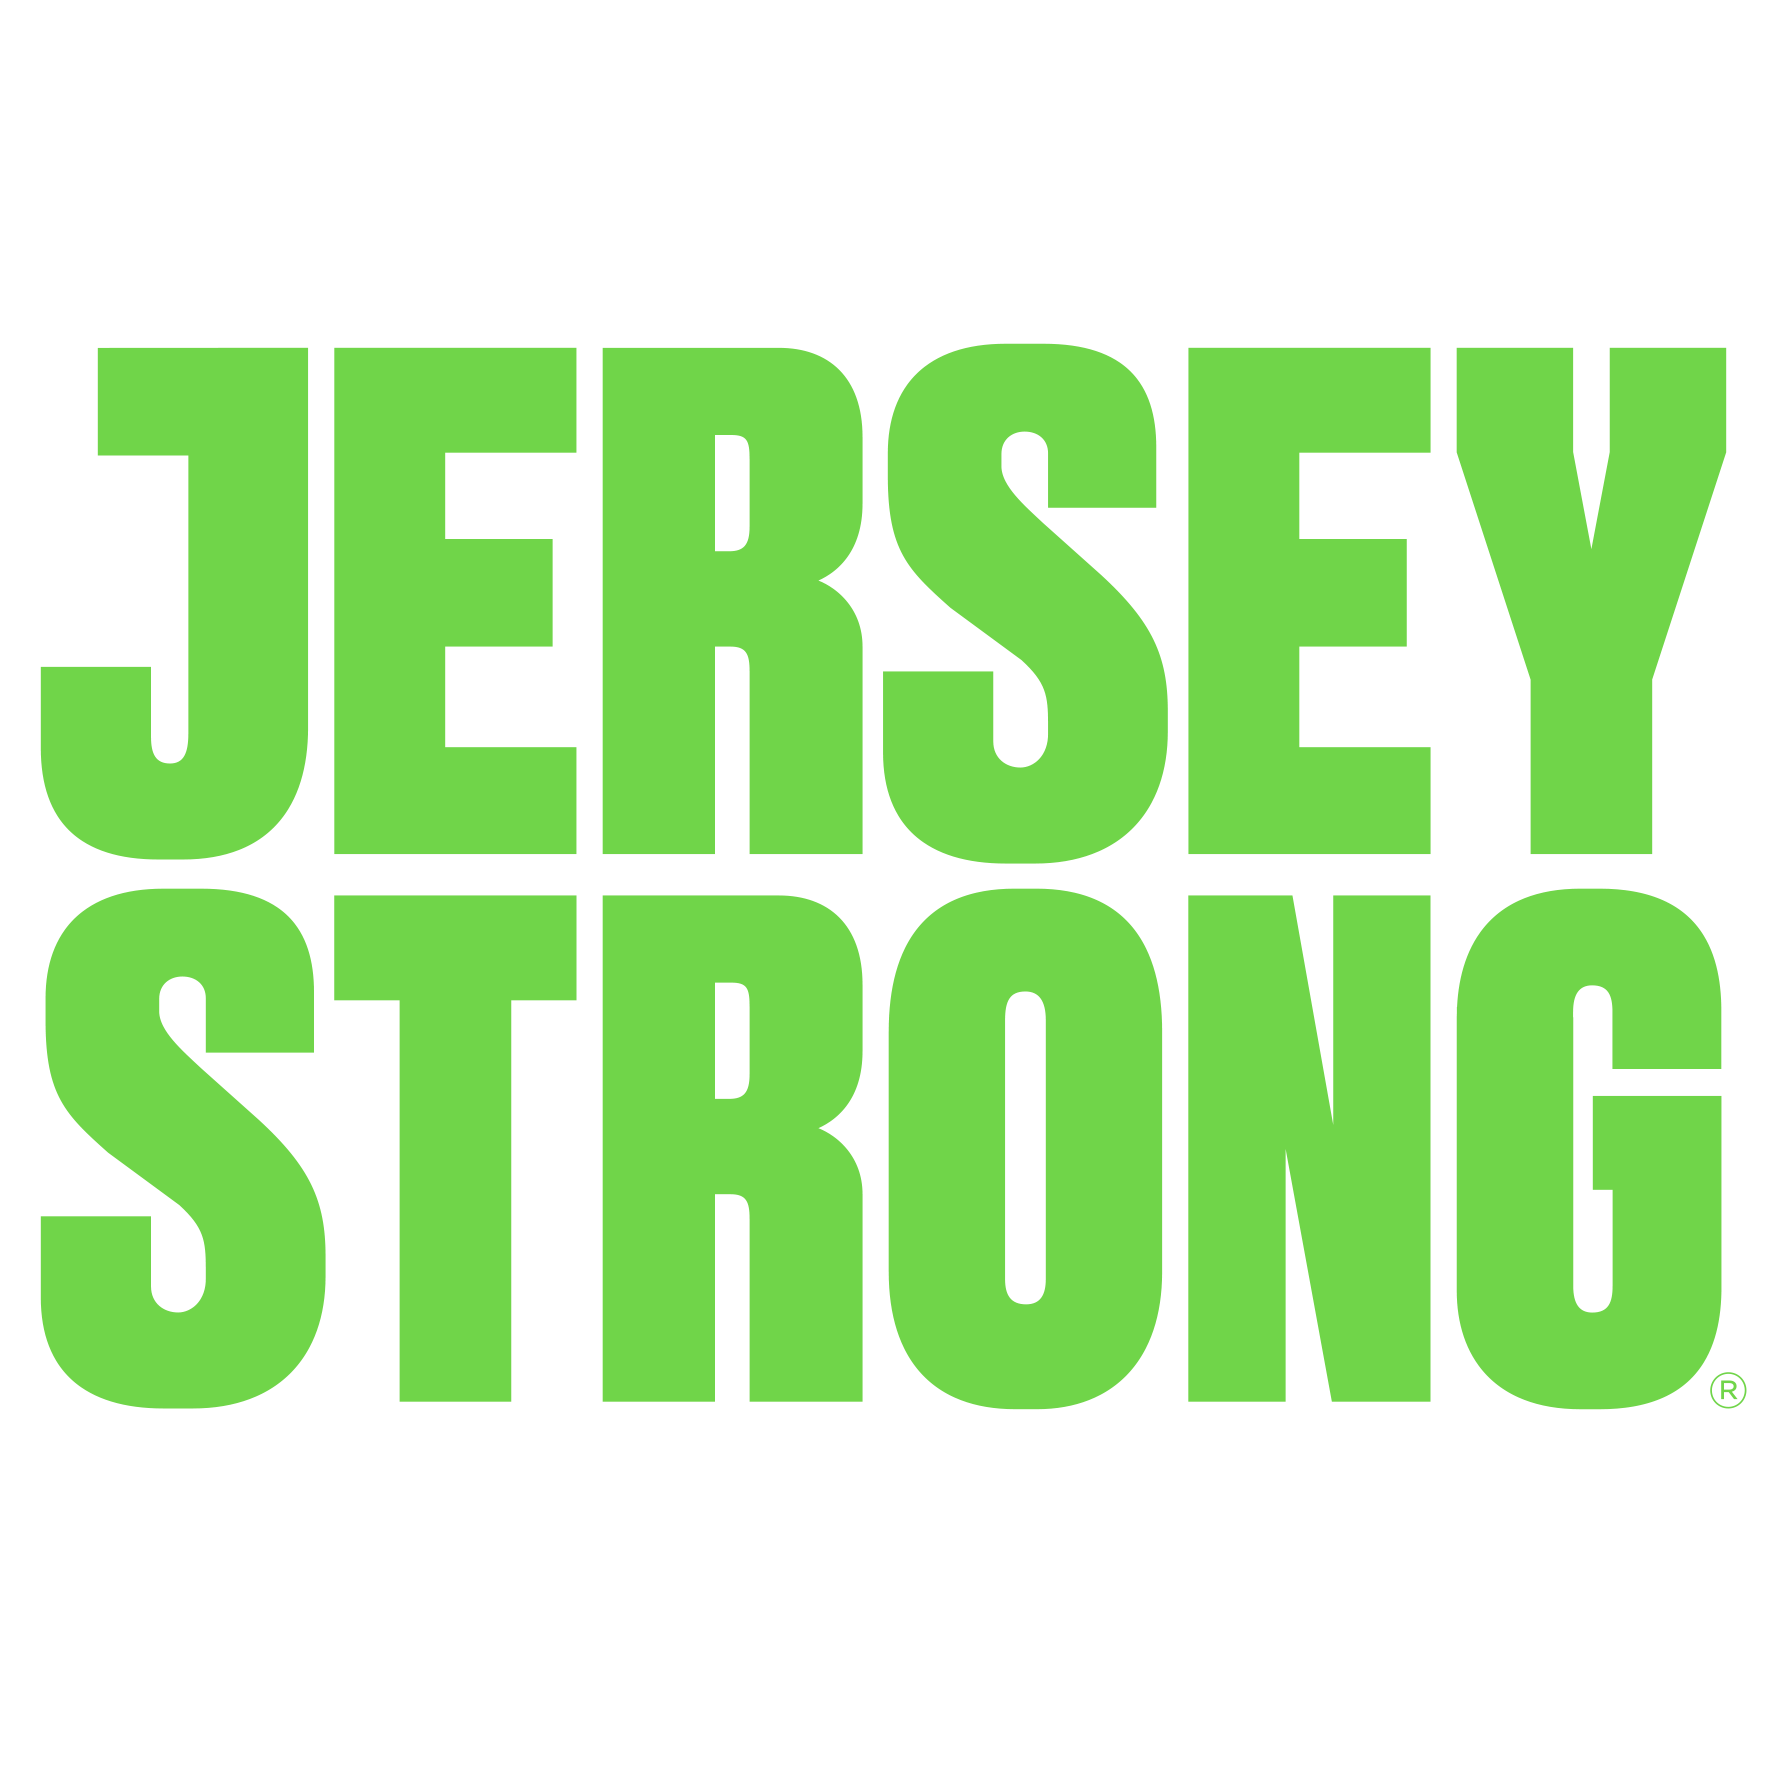 Jersey Strong Gym Logo